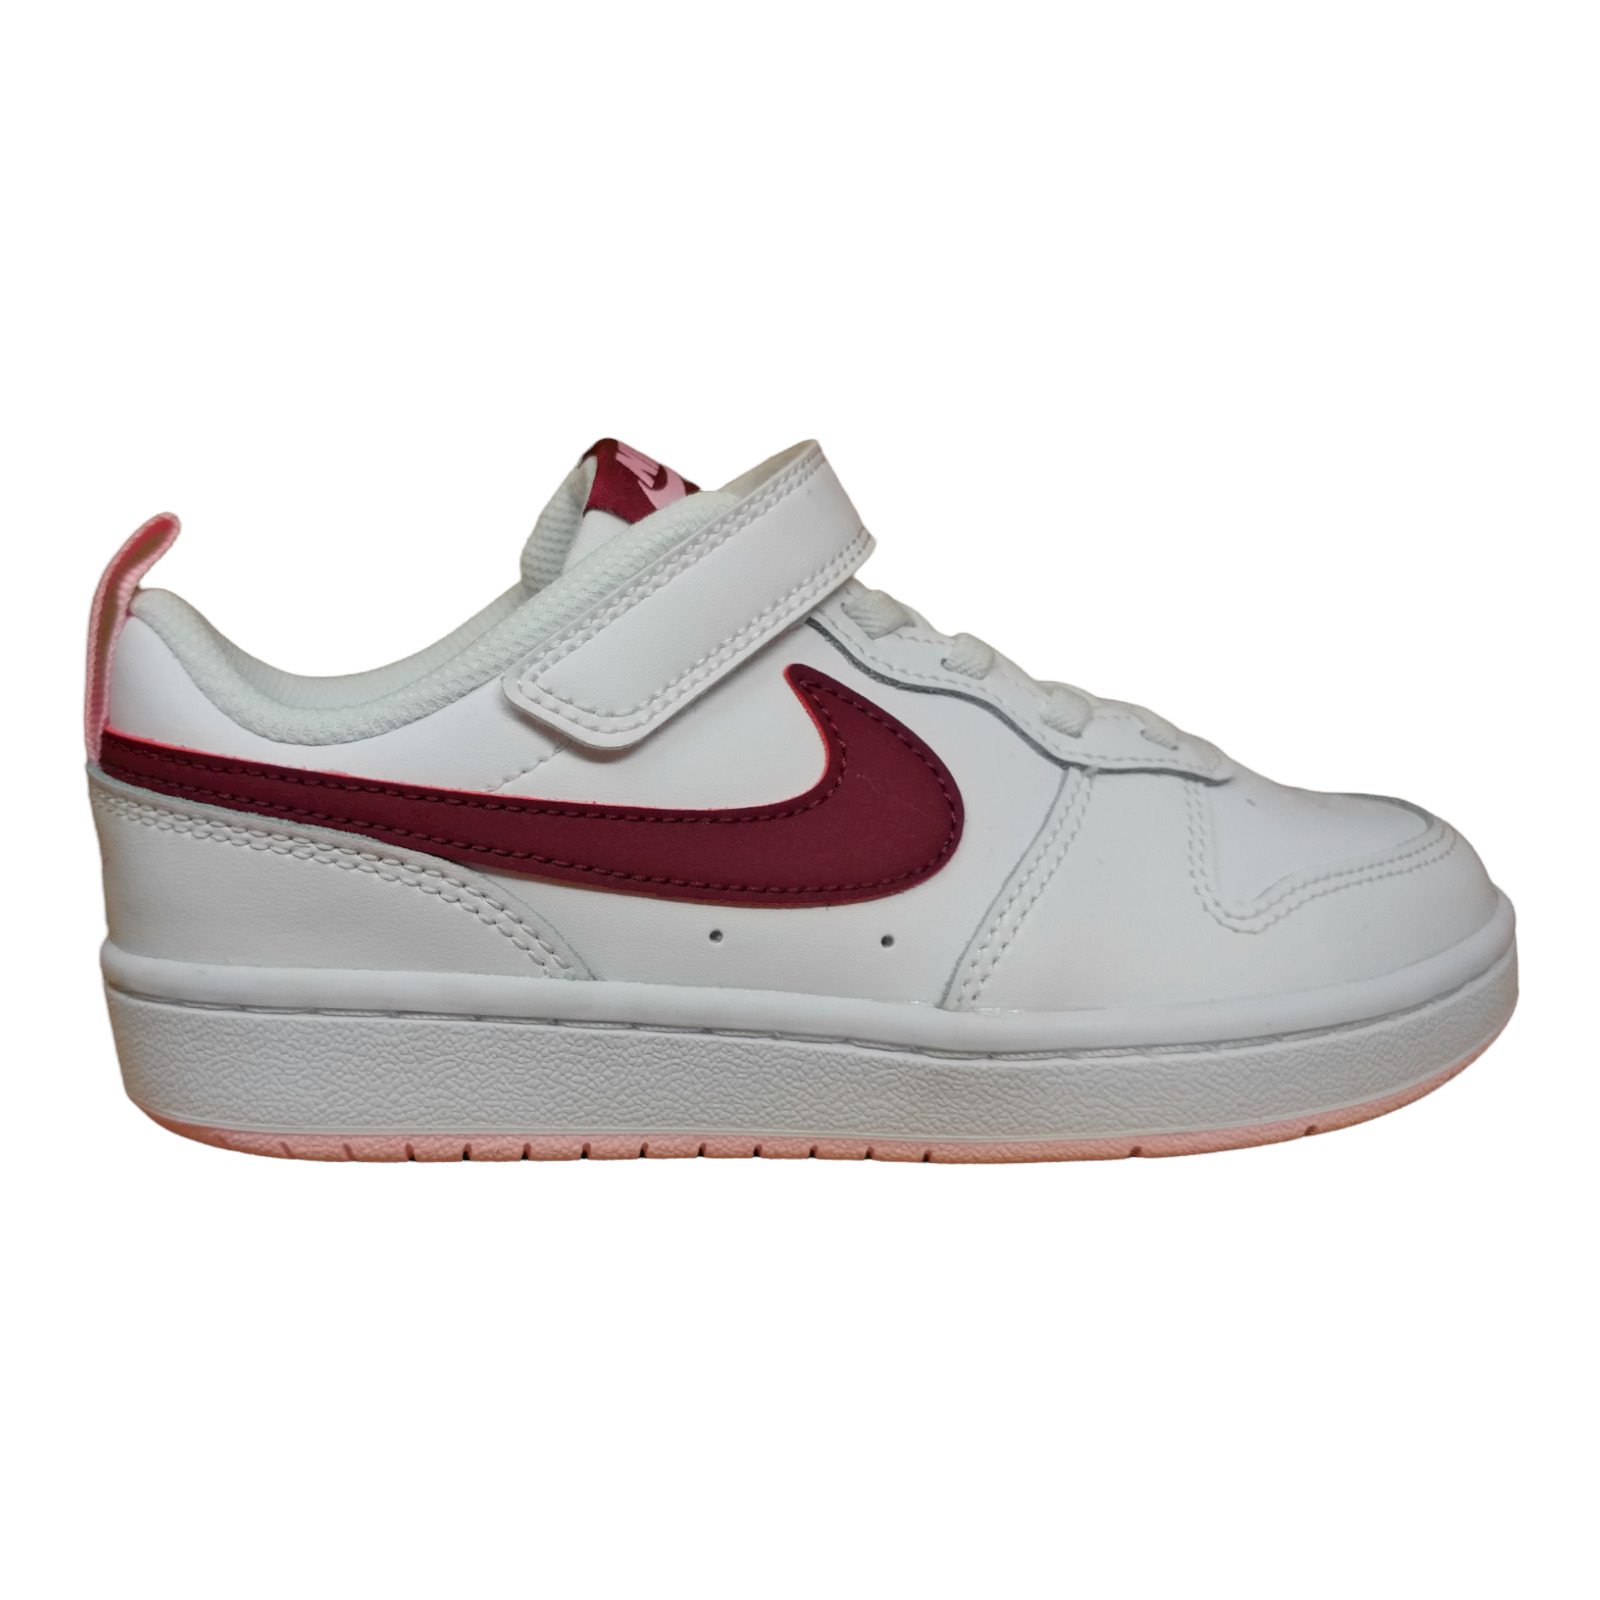 Nike Court Borough Low 2 (PSV) Youth Sneakers - Beetroot, US Sizing [BQ5451-120]